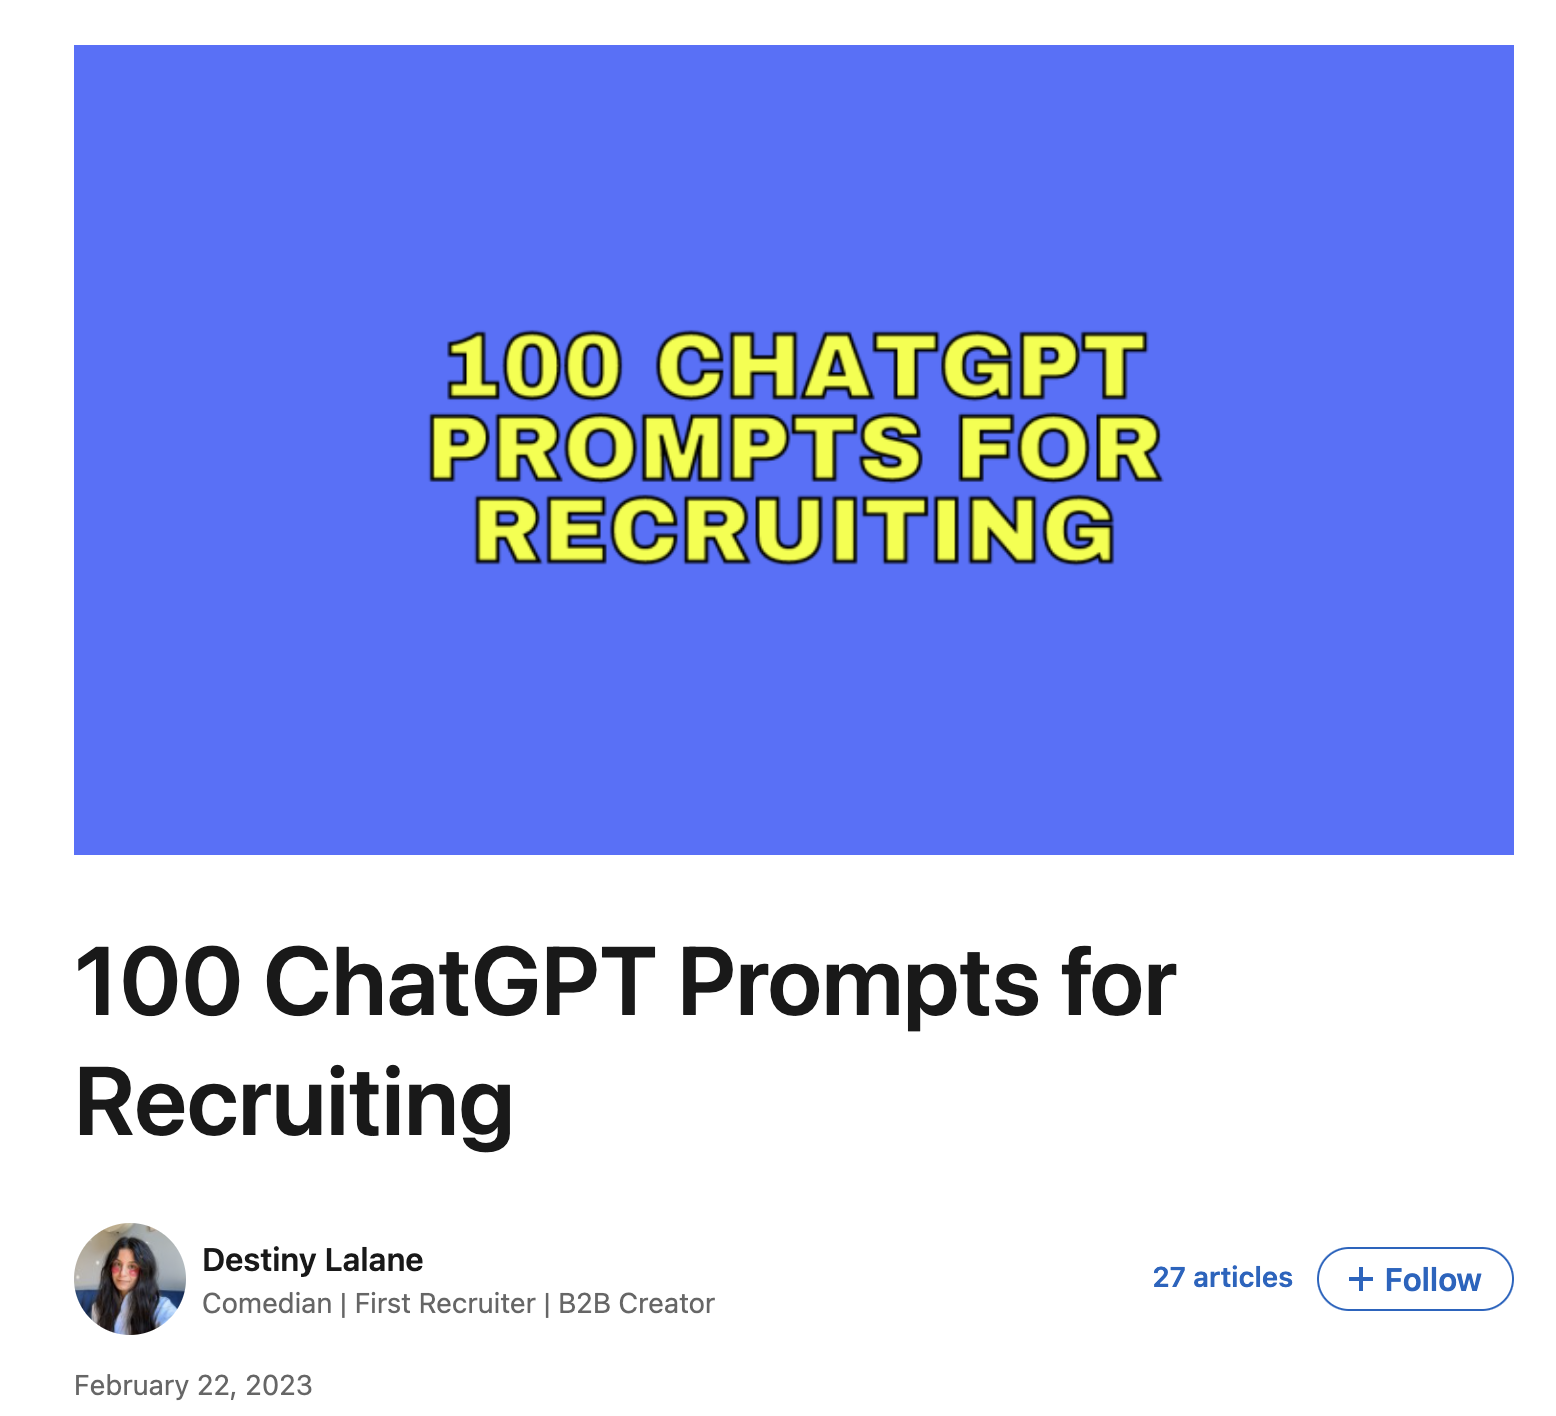 ChatGPT influencer on LinkedIn for recruiting. 